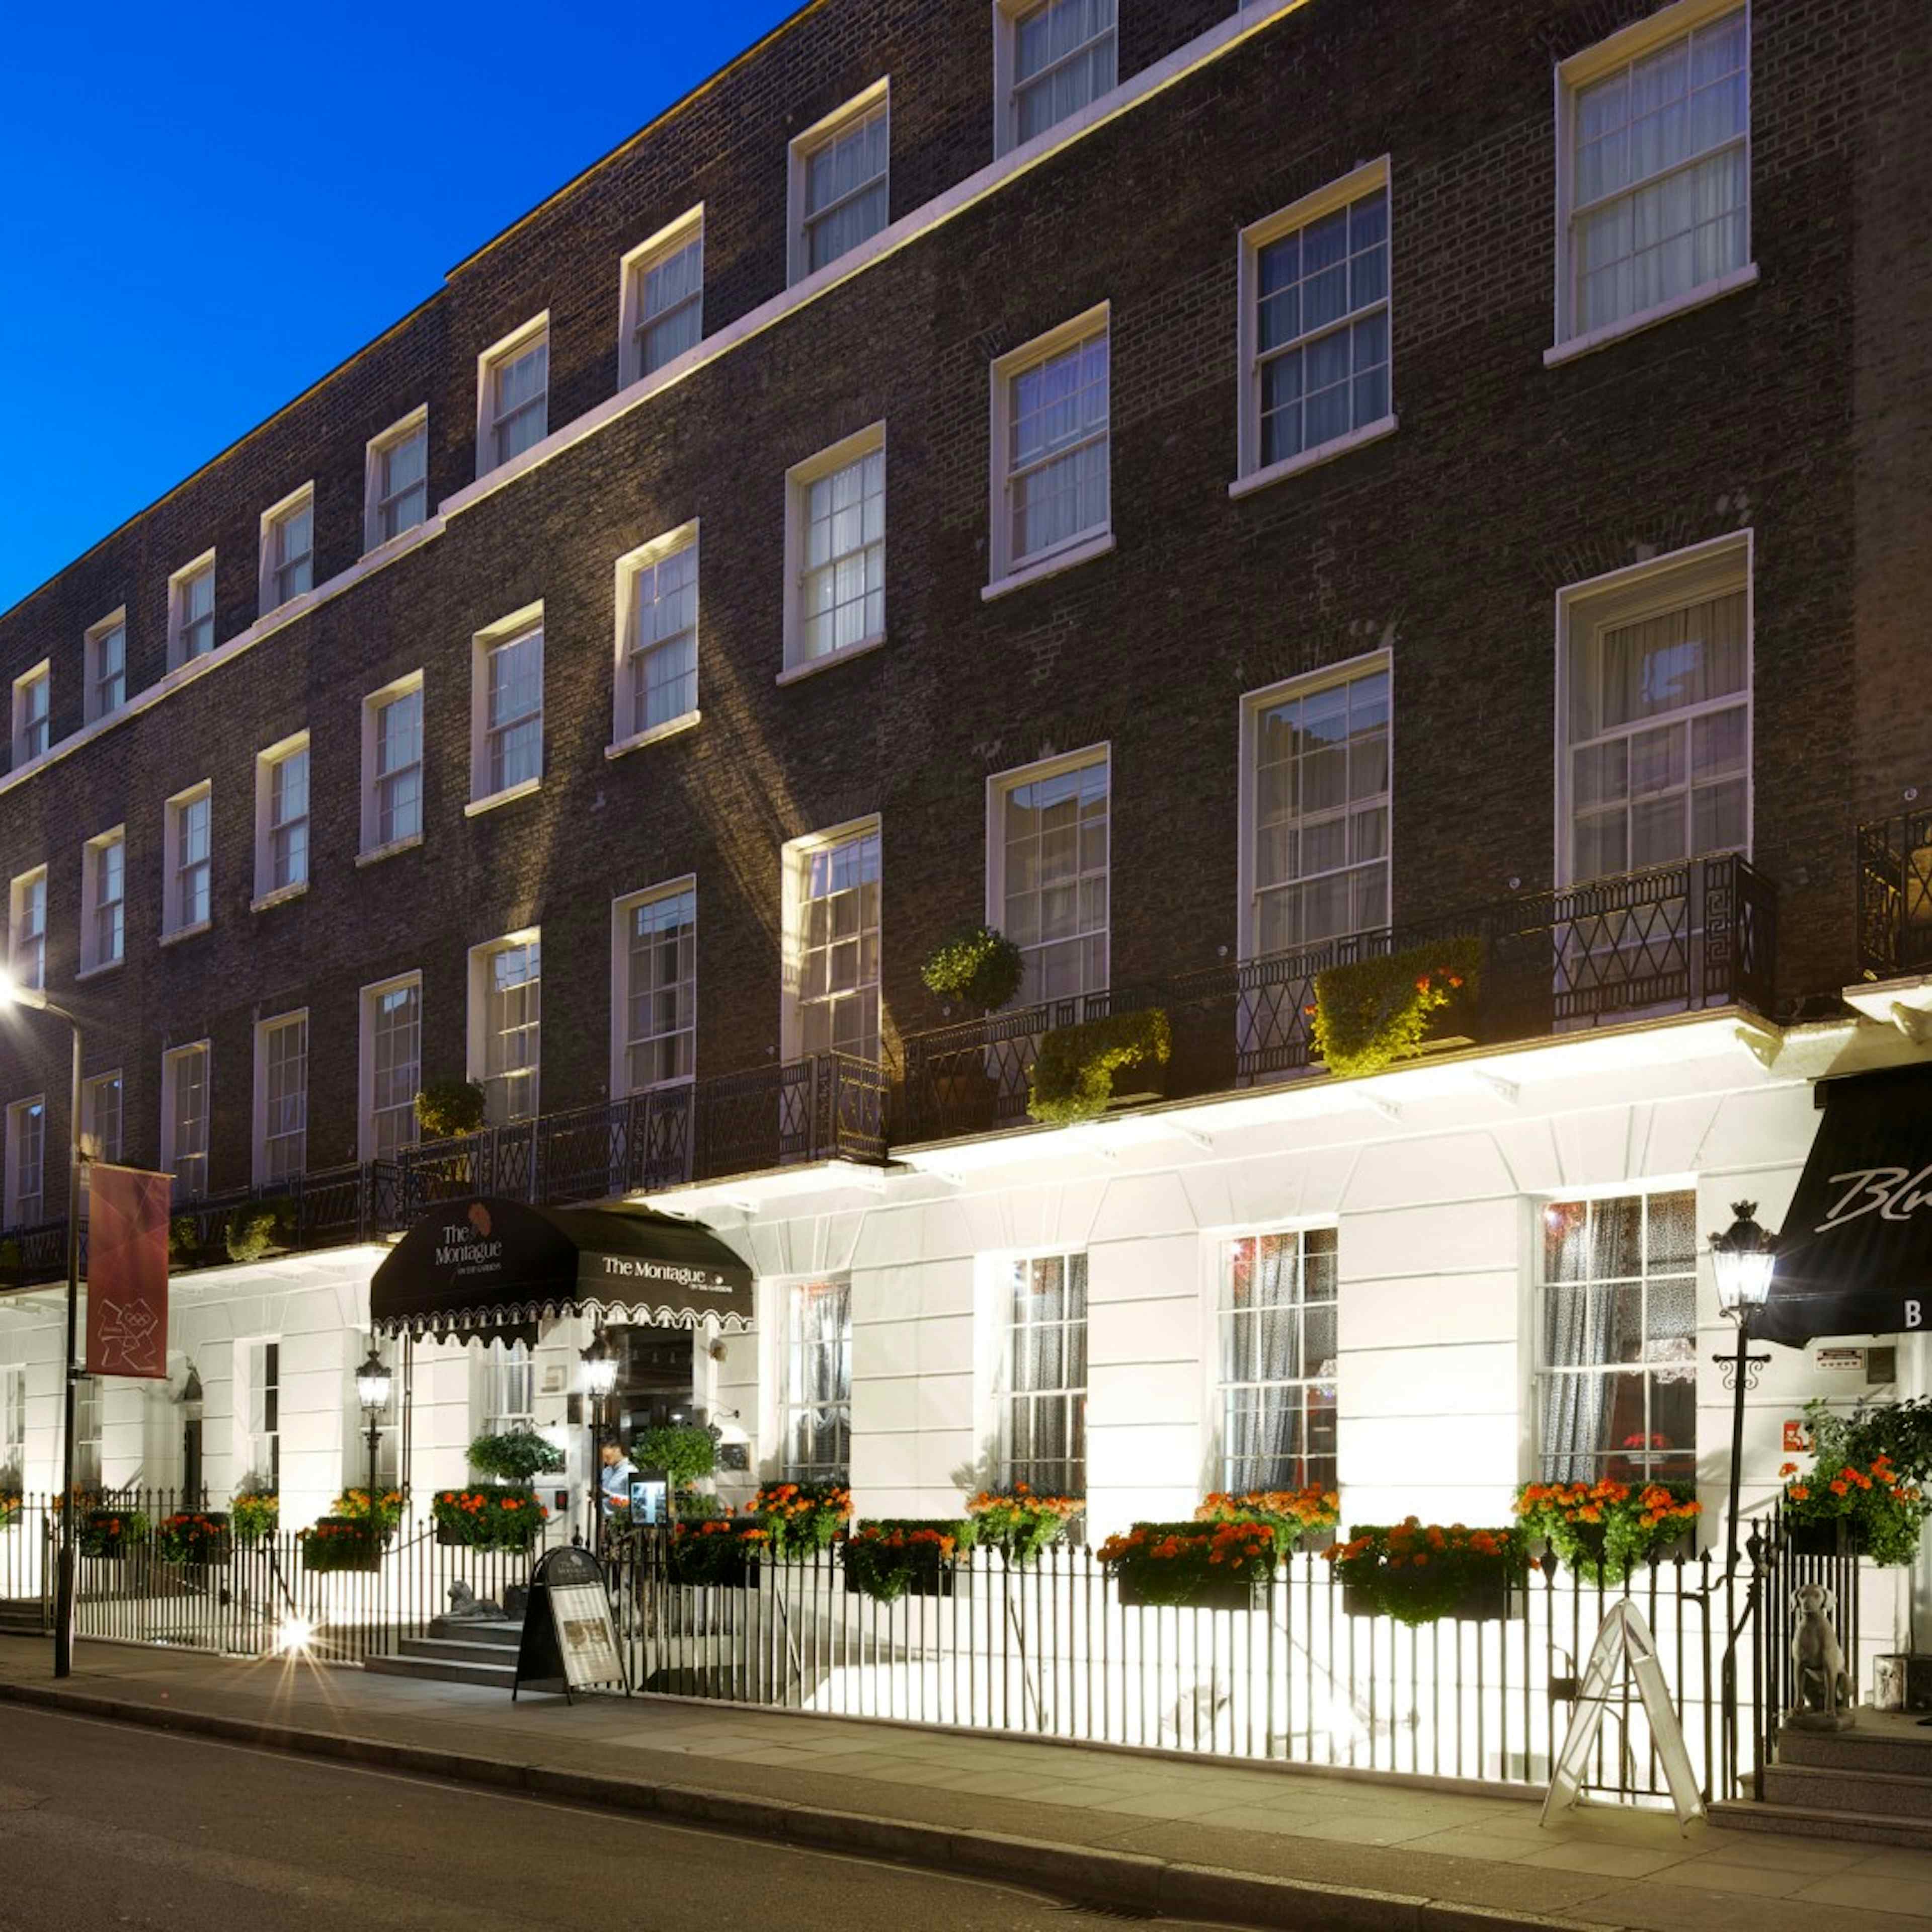 The Montague on the Gardens - Bloomsbury Suite image 3